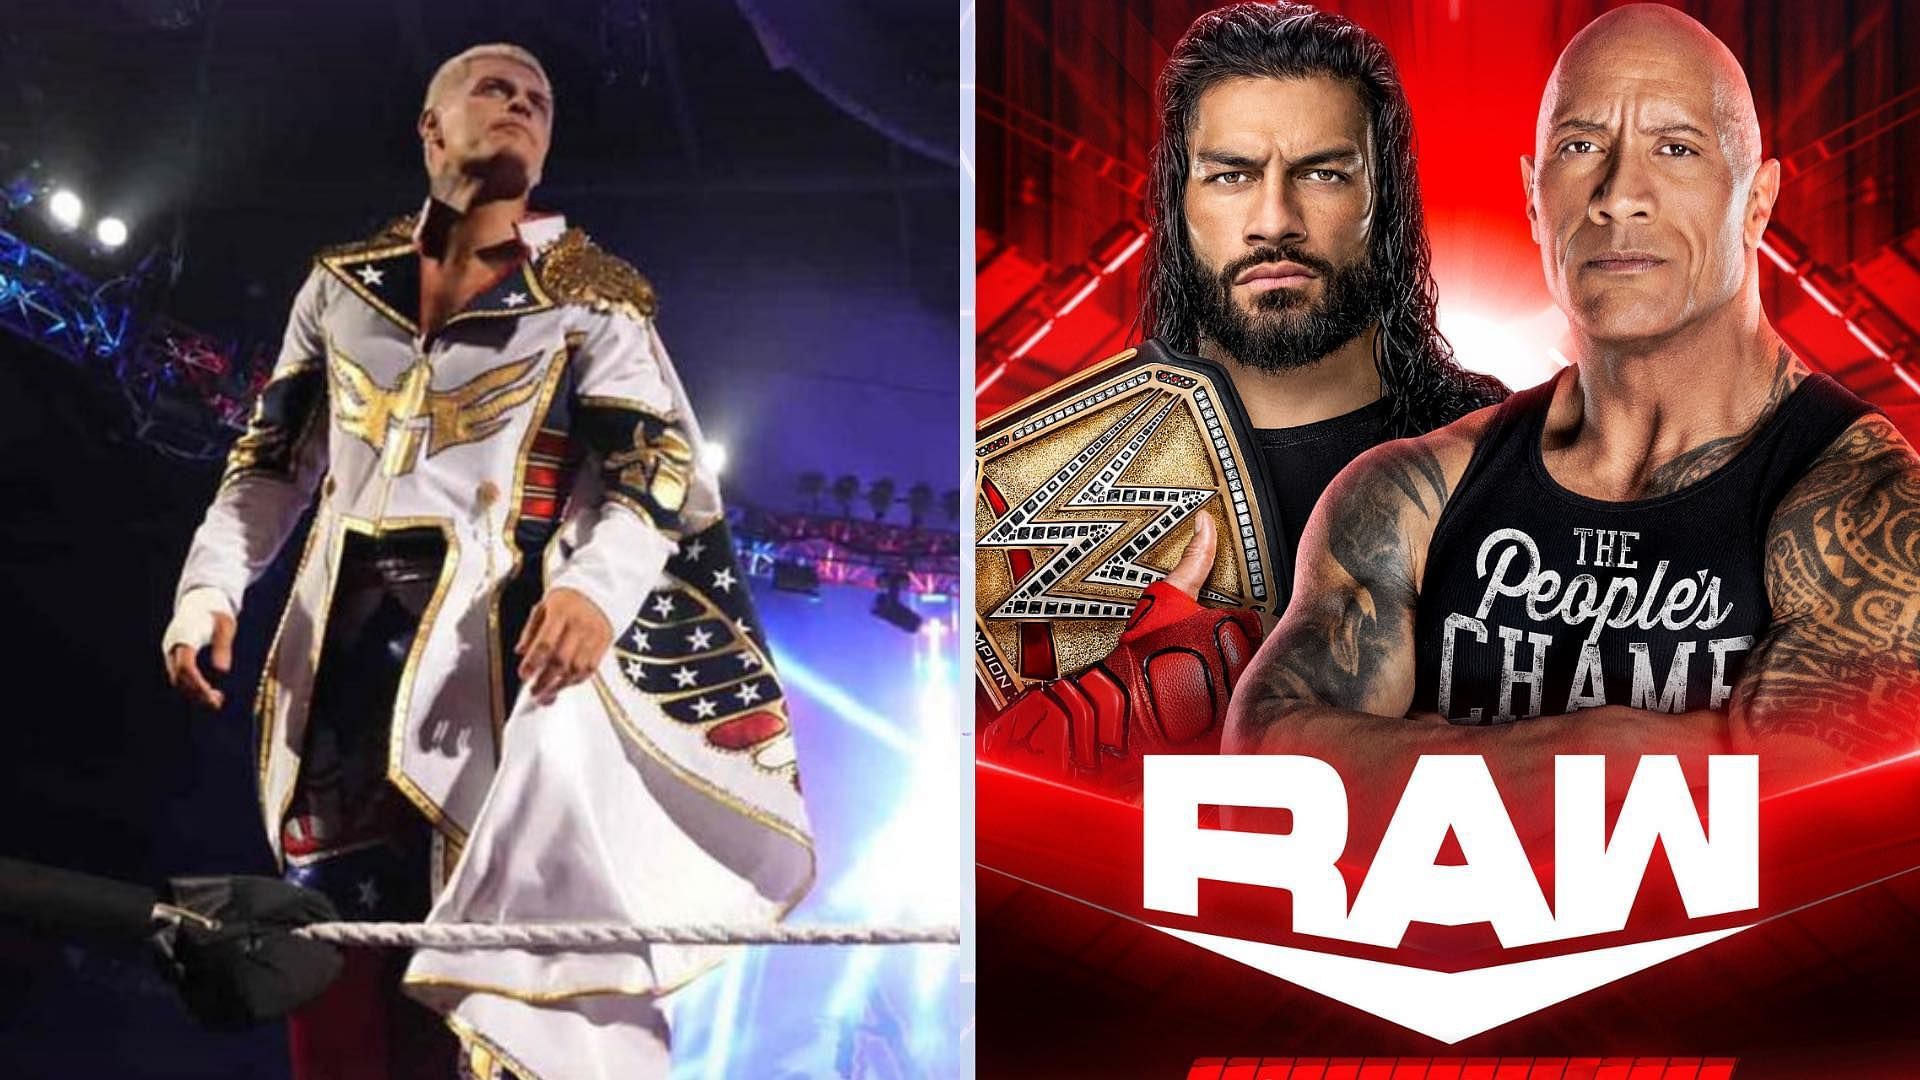 WWE RAW this week will be live from the Barclays Center, Brooklyn